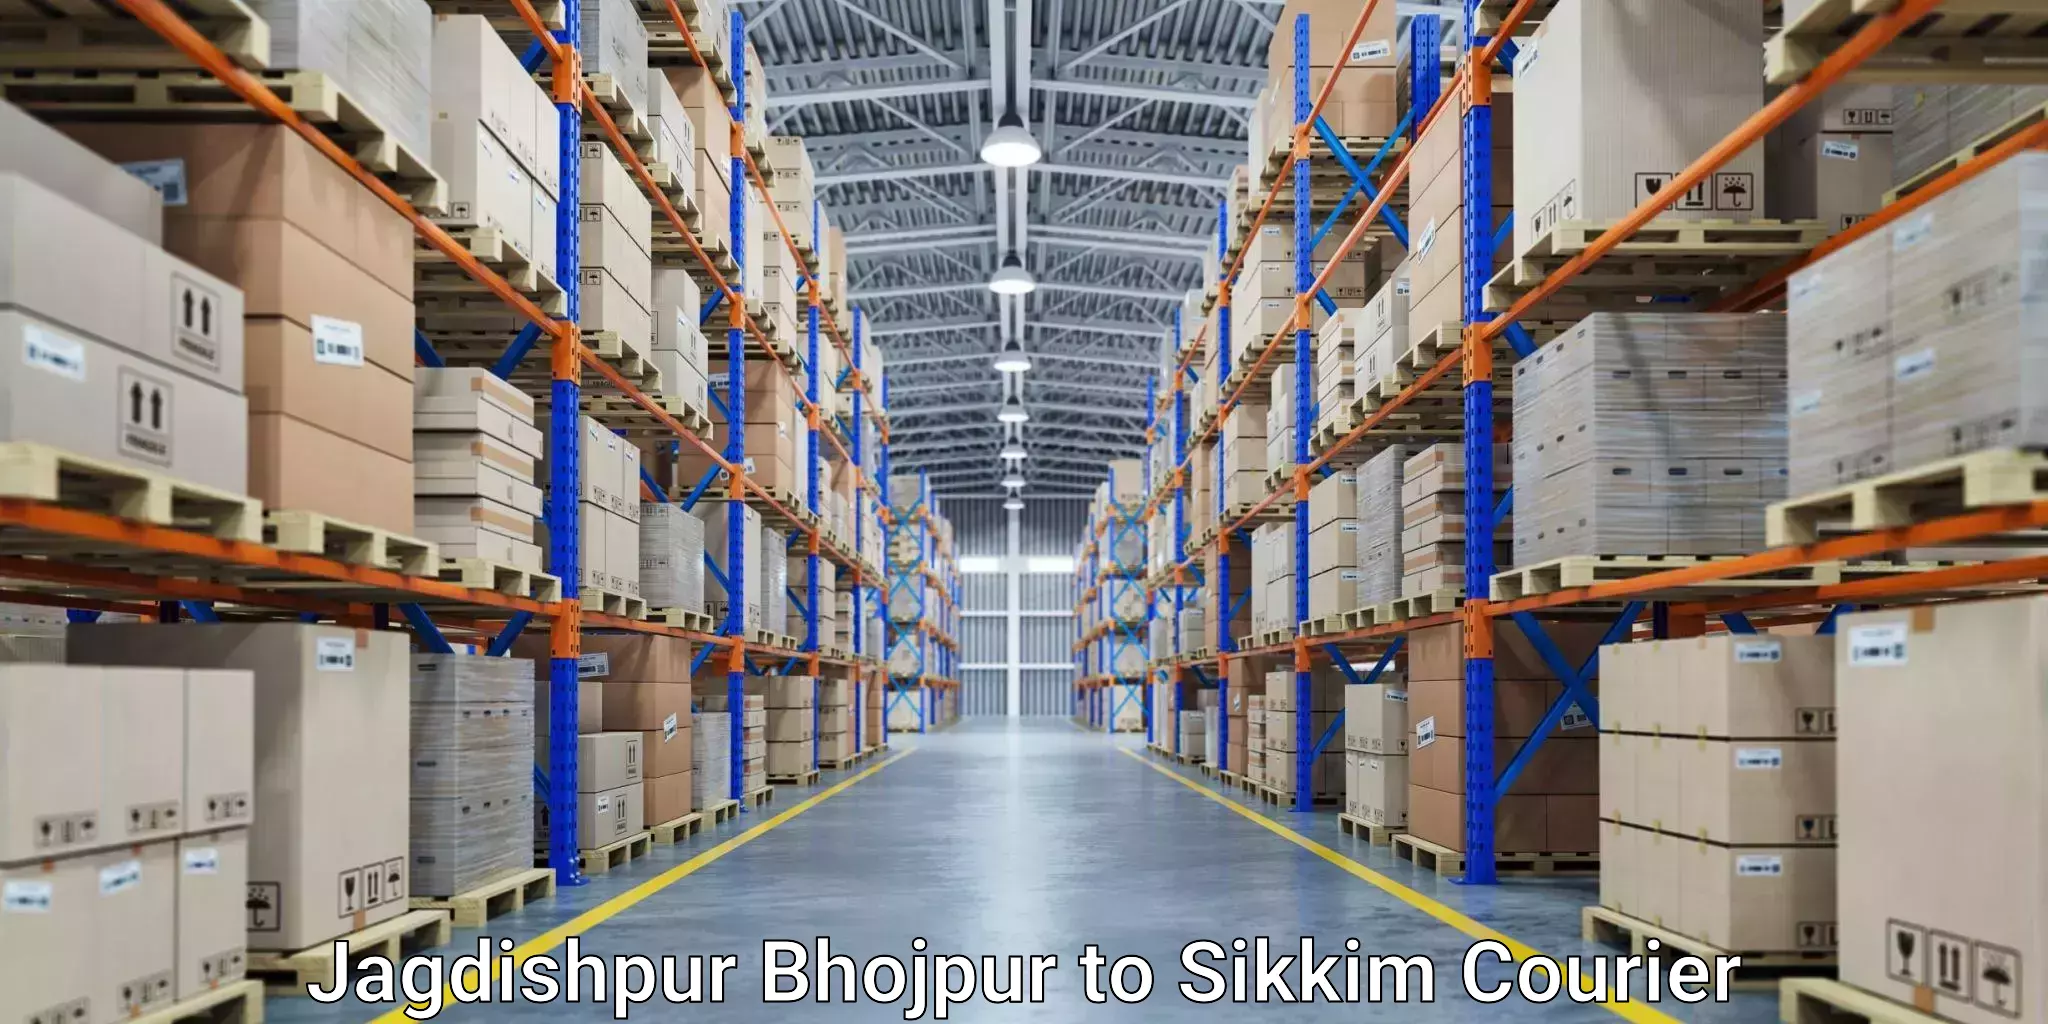 Courier dispatch services Jagdishpur Bhojpur to Jorethang